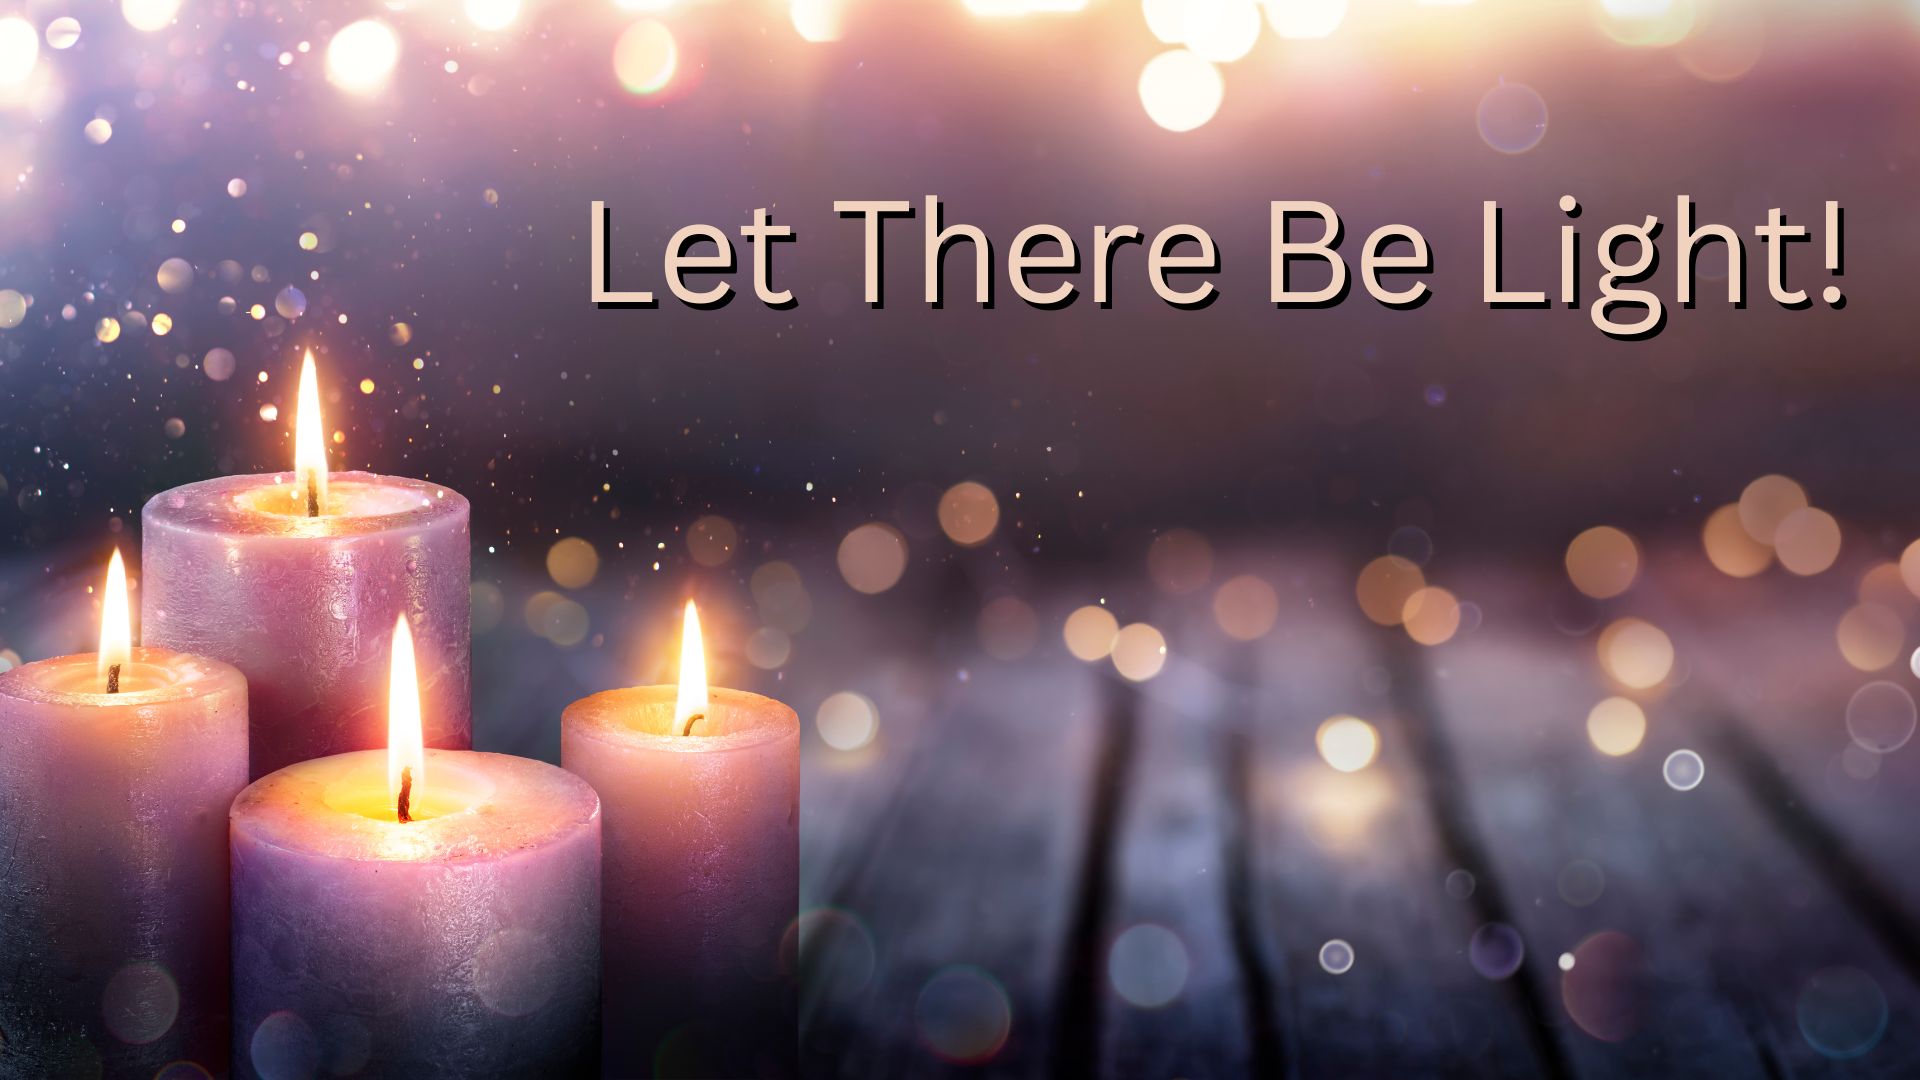 Featured image for “Let There Be Light!”